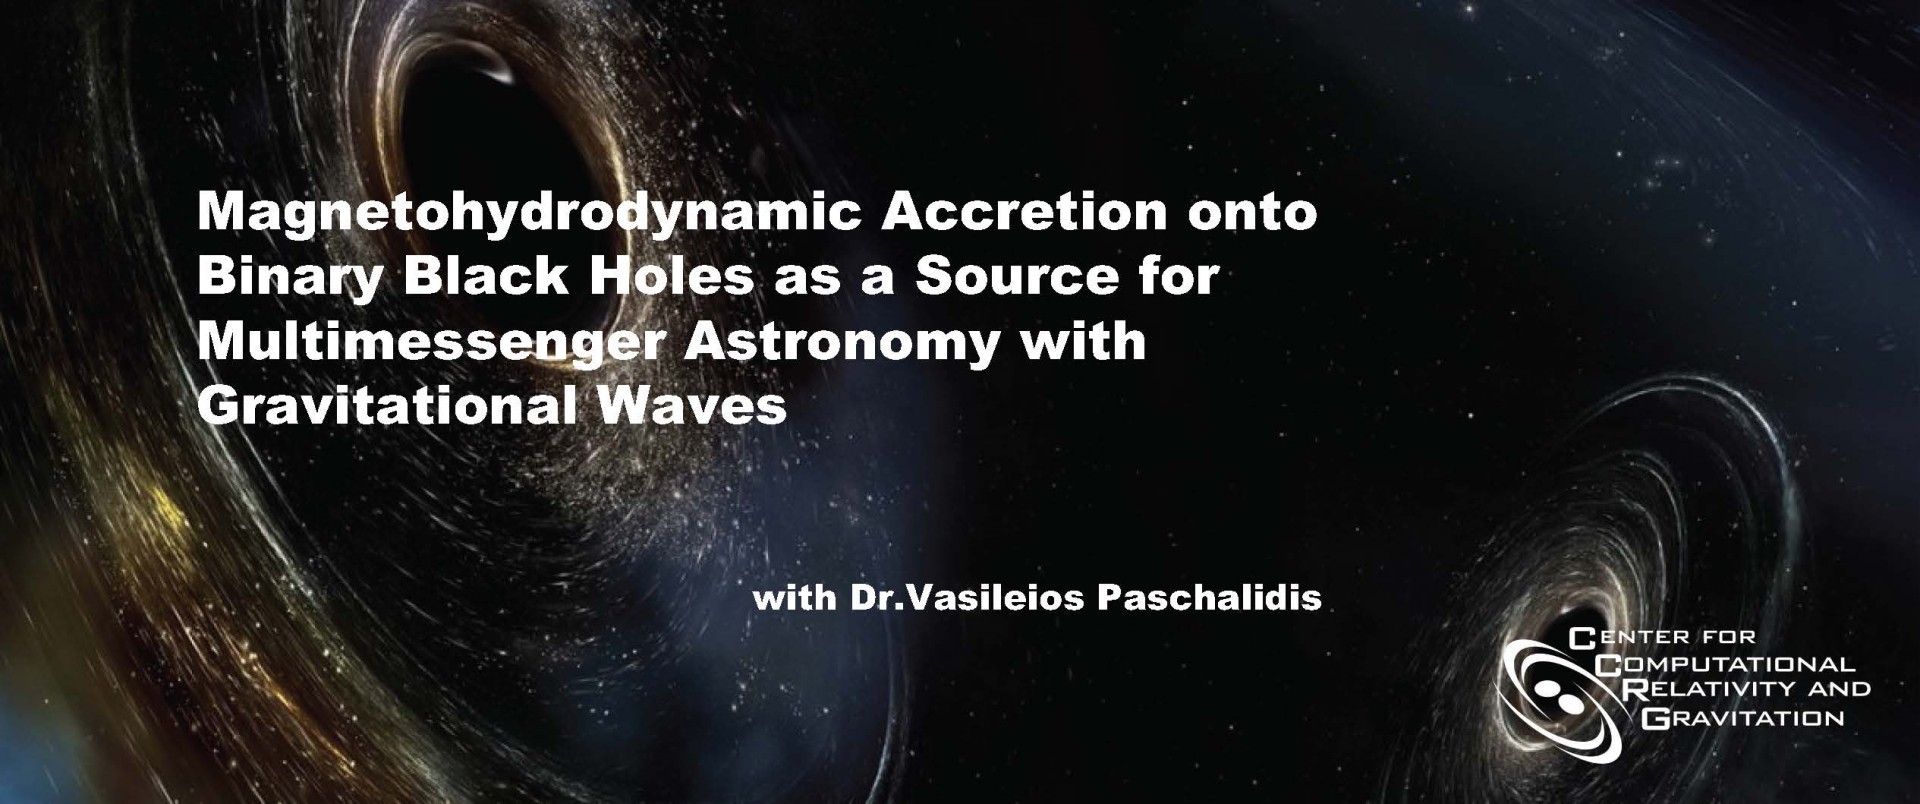 Magnetohydrodynamic Accretion onto Binary Black Holes as a Source for Multimessenger Astronomy with Gravitational Waves